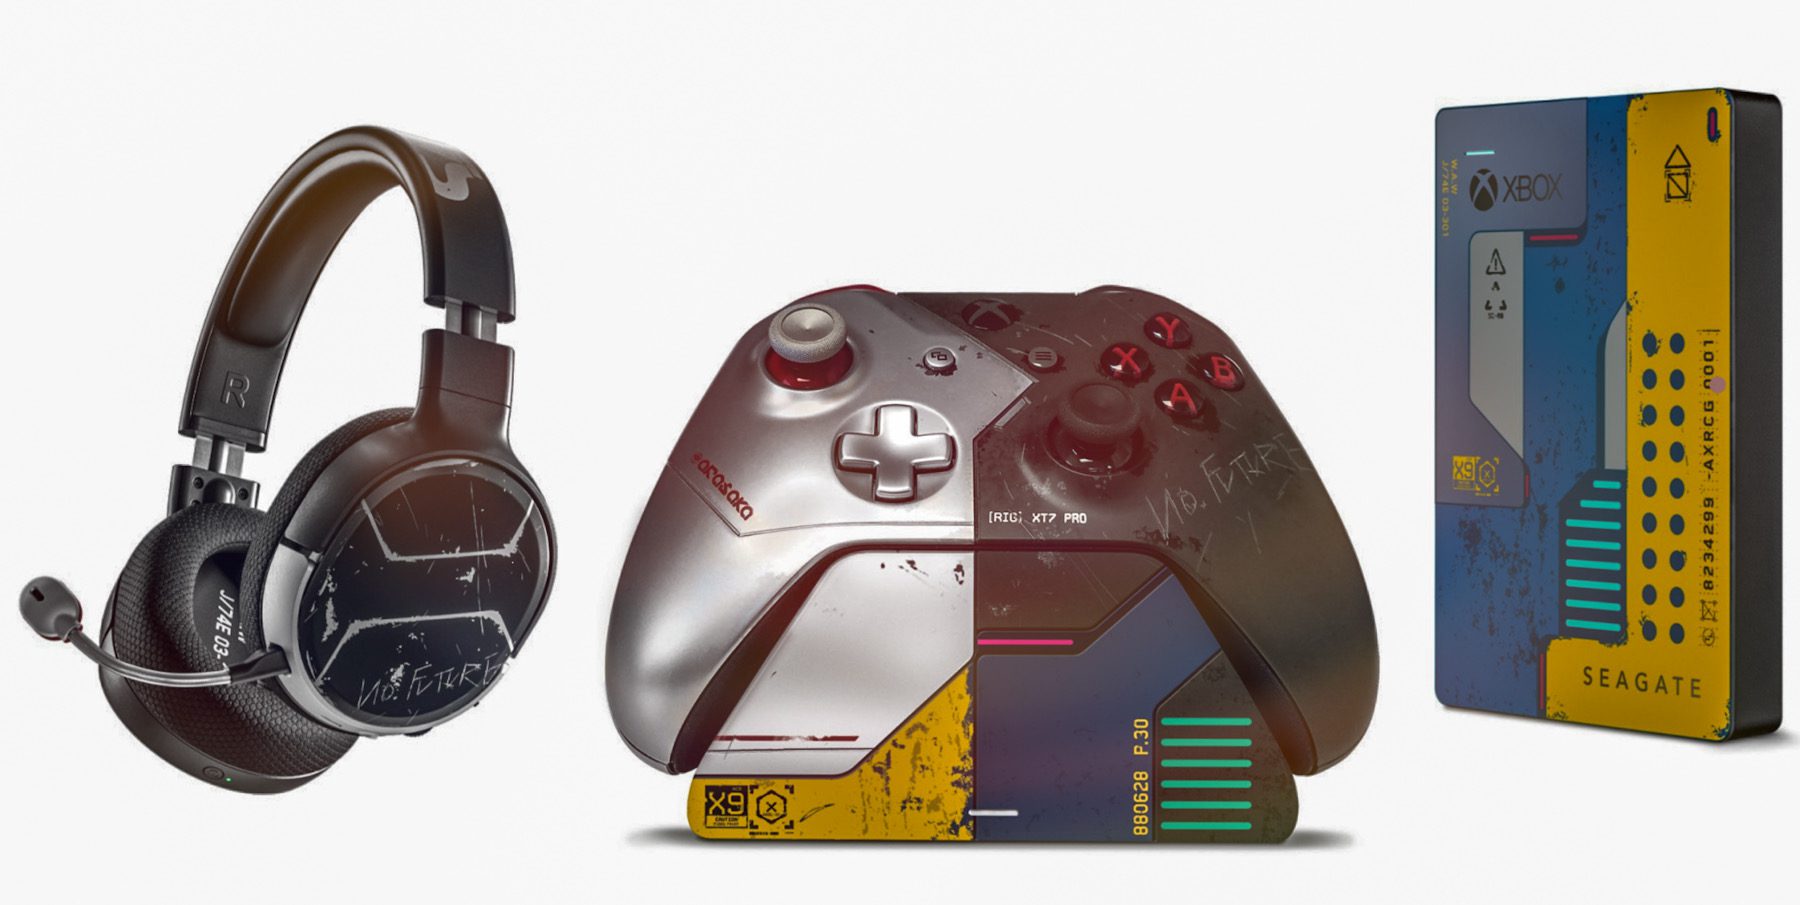 Cyberpunk 2077 Xbox accessories are now available